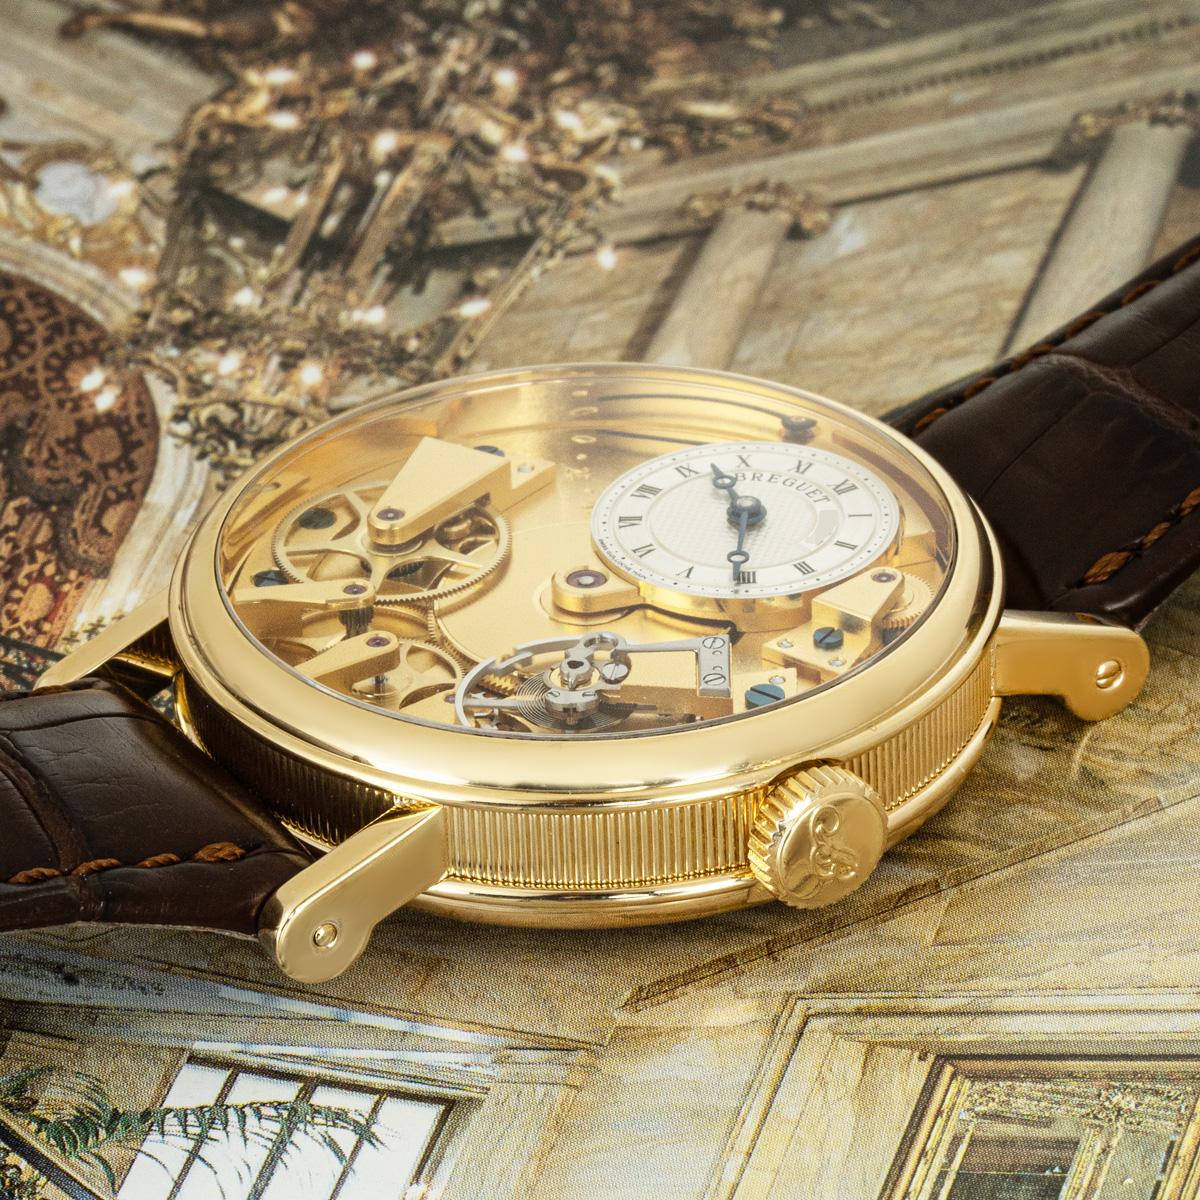 A 37mm Breguet Tradition wristwatch crafted in yellow gold. Featuring a champagne open-worked dial with an off-centred silver guilloche dial with Roman numerals, blued steel Breguet hands and a power reserve indicator.

Fitted with sapphire glass